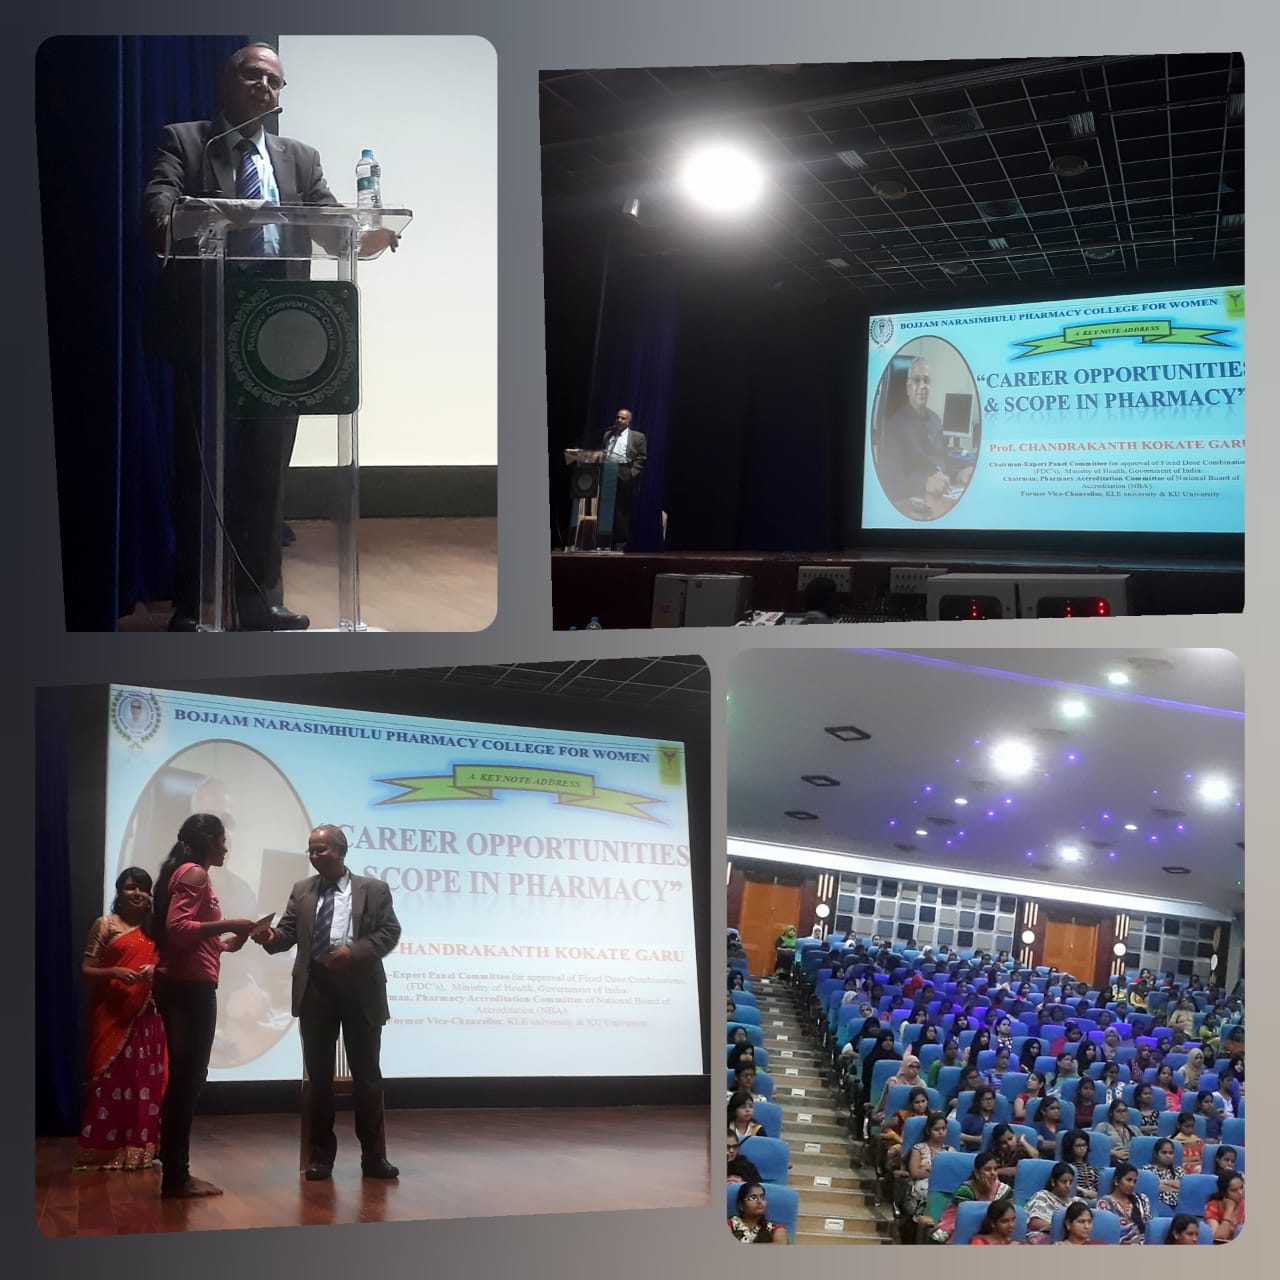 Seminar on 'Career Opportunities and Scope in Pharmacy' by Prof. Chandrakanth Kokate, Former President, Pharmacy Council of India.